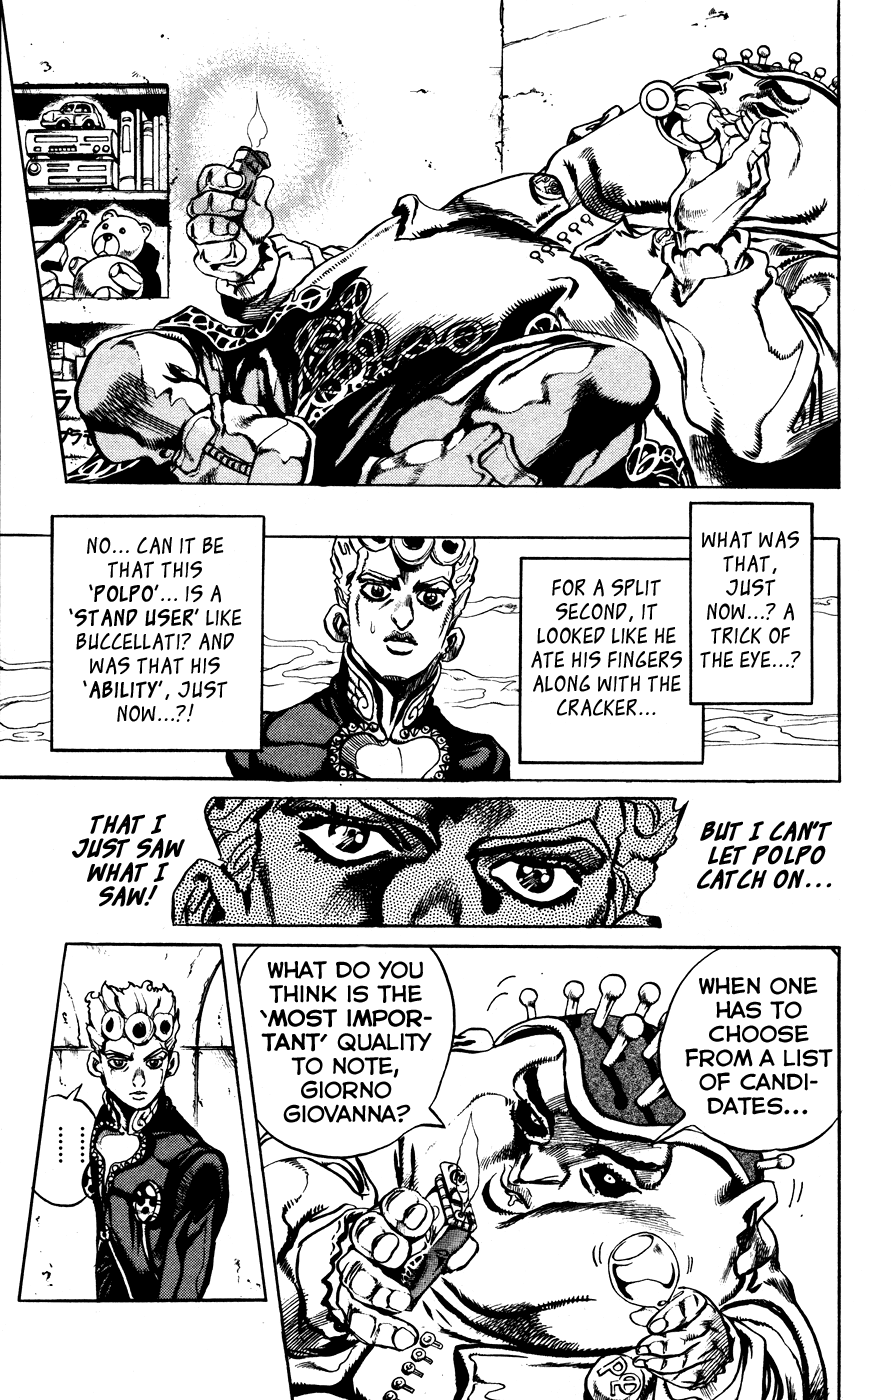 Jojo's Bizarre Adventure Part 5 - Vento Aureo Vol.2 Chapter 10: Meet The Gangster Behind The Wall Part 2 - Picture 3